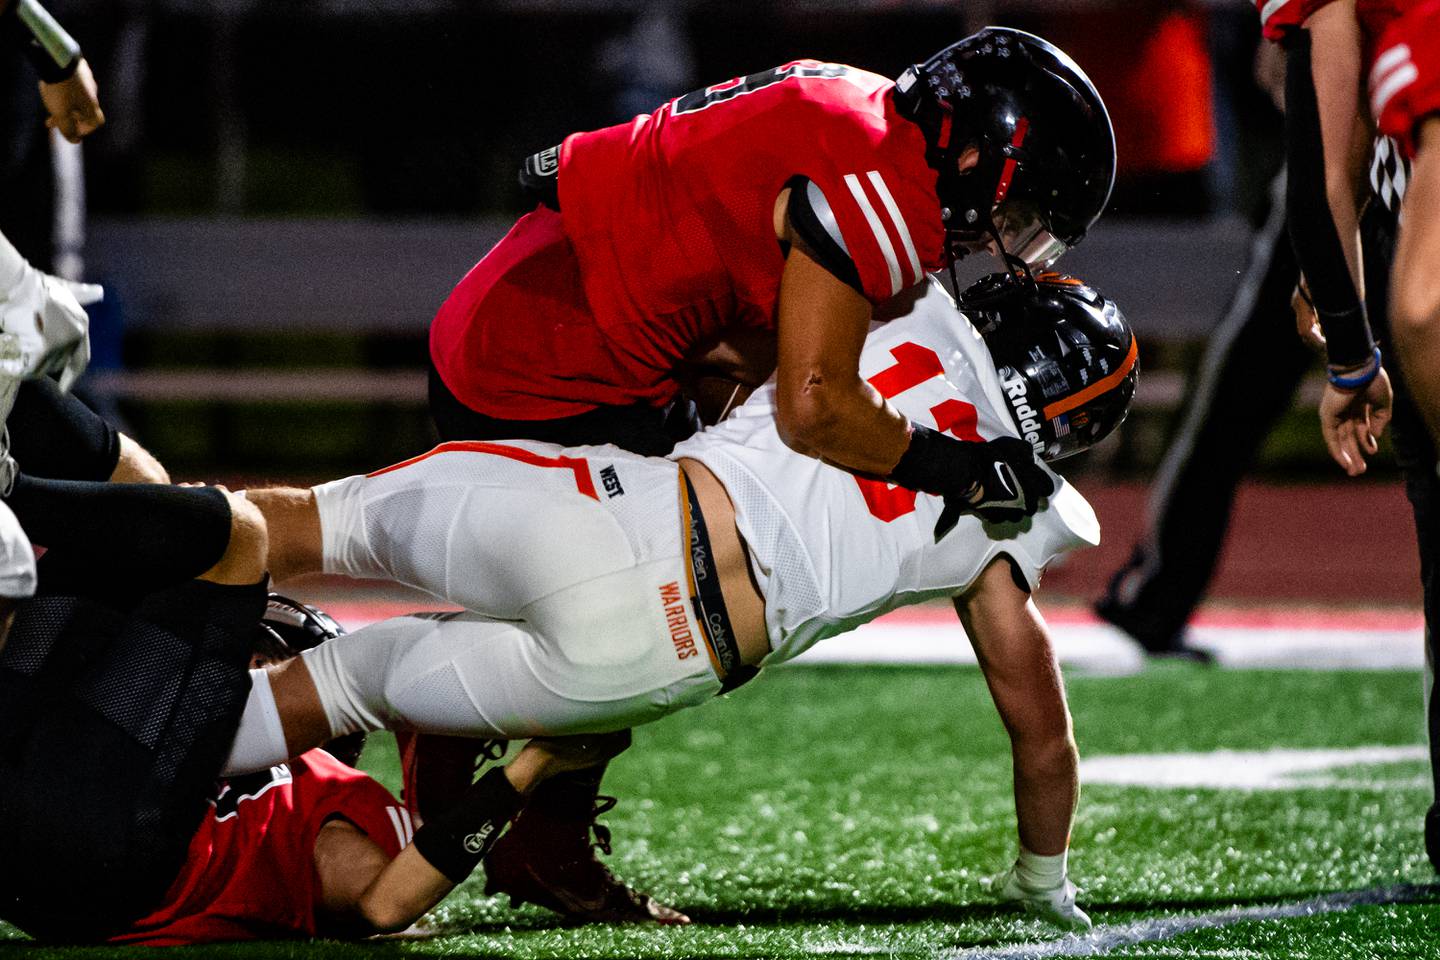 Lincoln-Way Centrals Nick Mitcheff brings down Lincoln-way Wests Joey Campagna During a game on Friday Sept. 15, 2023 at Lincoln-Way Central High School in New Lenox